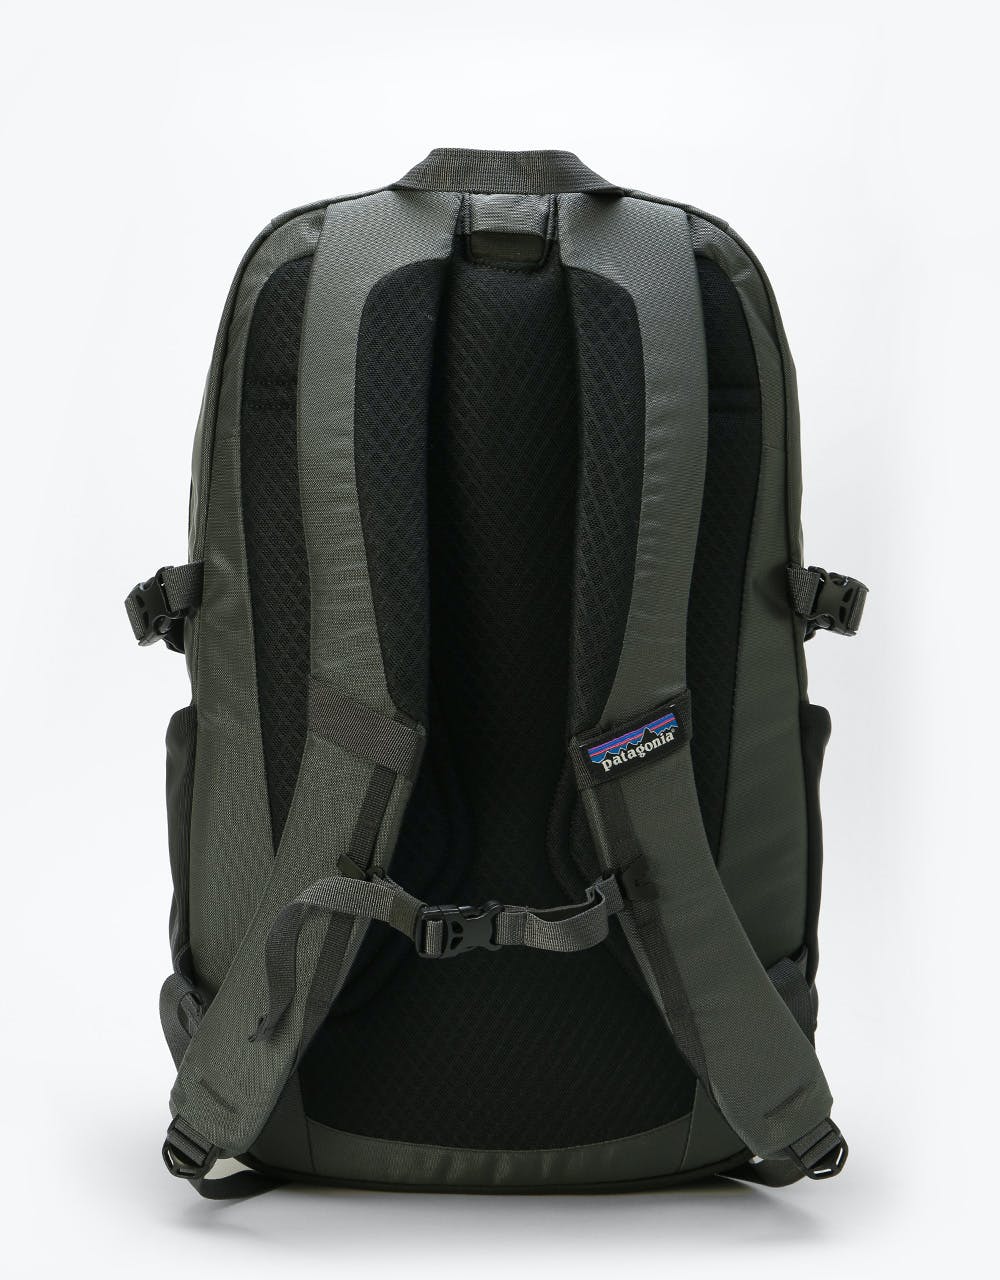 Patagonia Refugio Pack 28L Backpack - Forge Grey/Textile Green